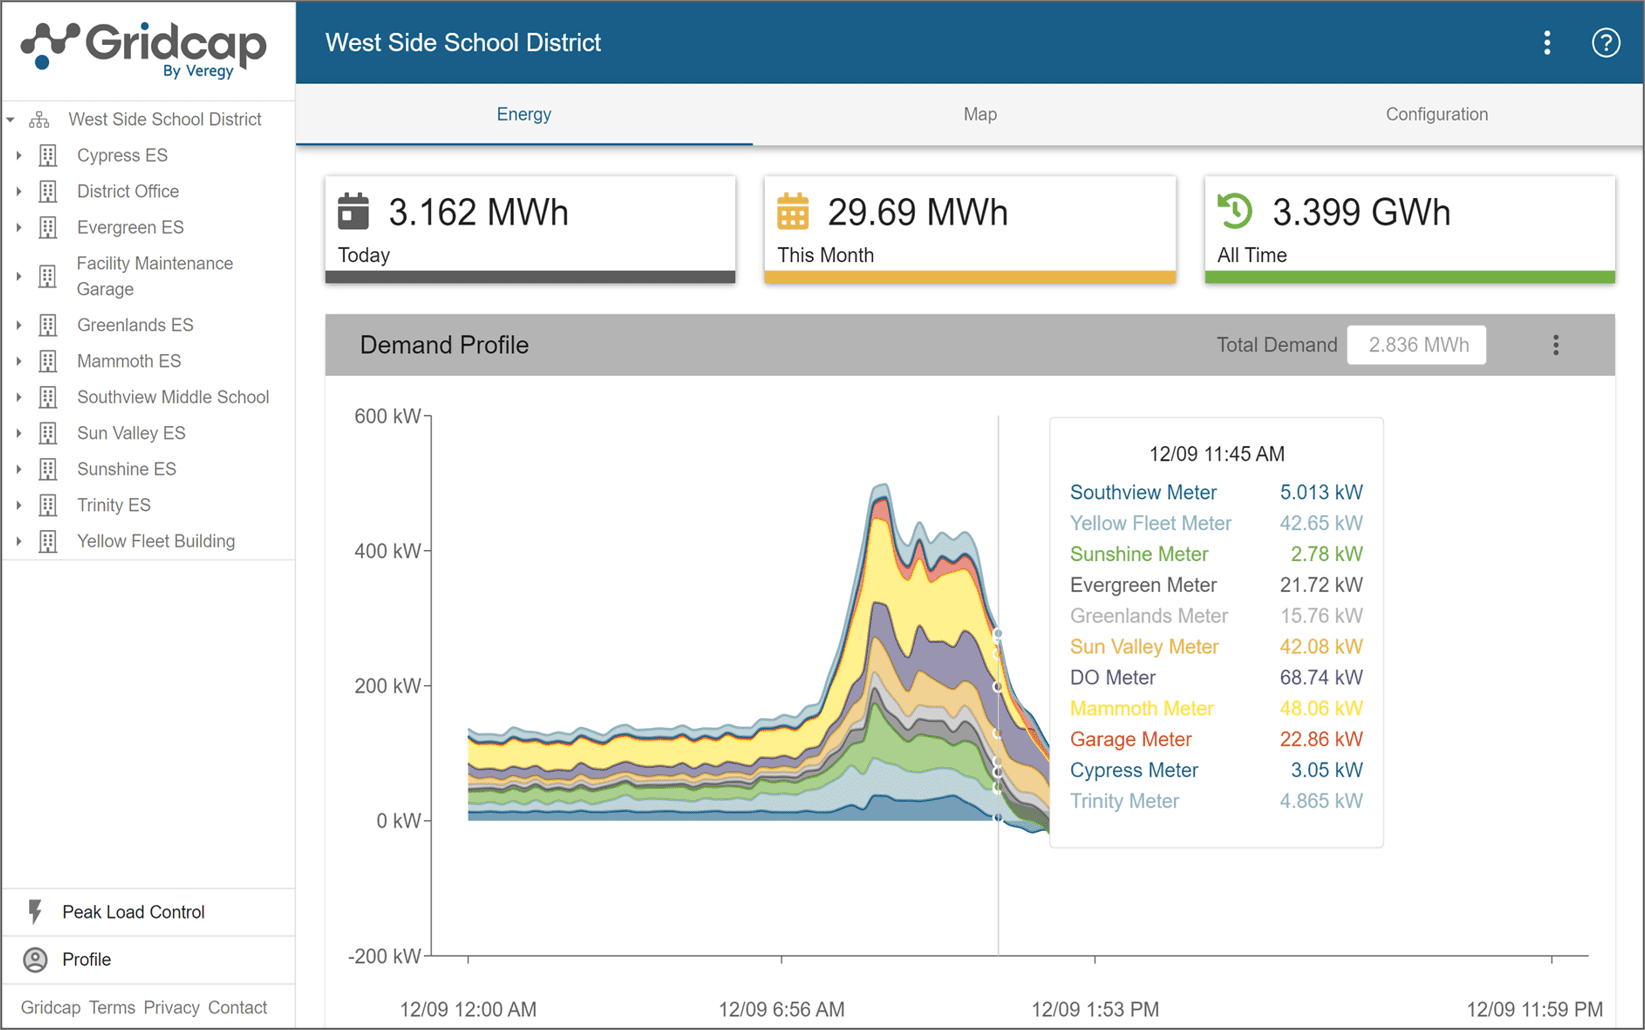 Monitor, analyze, and visualize savings in real time with live energy dashboards in Gridcap.